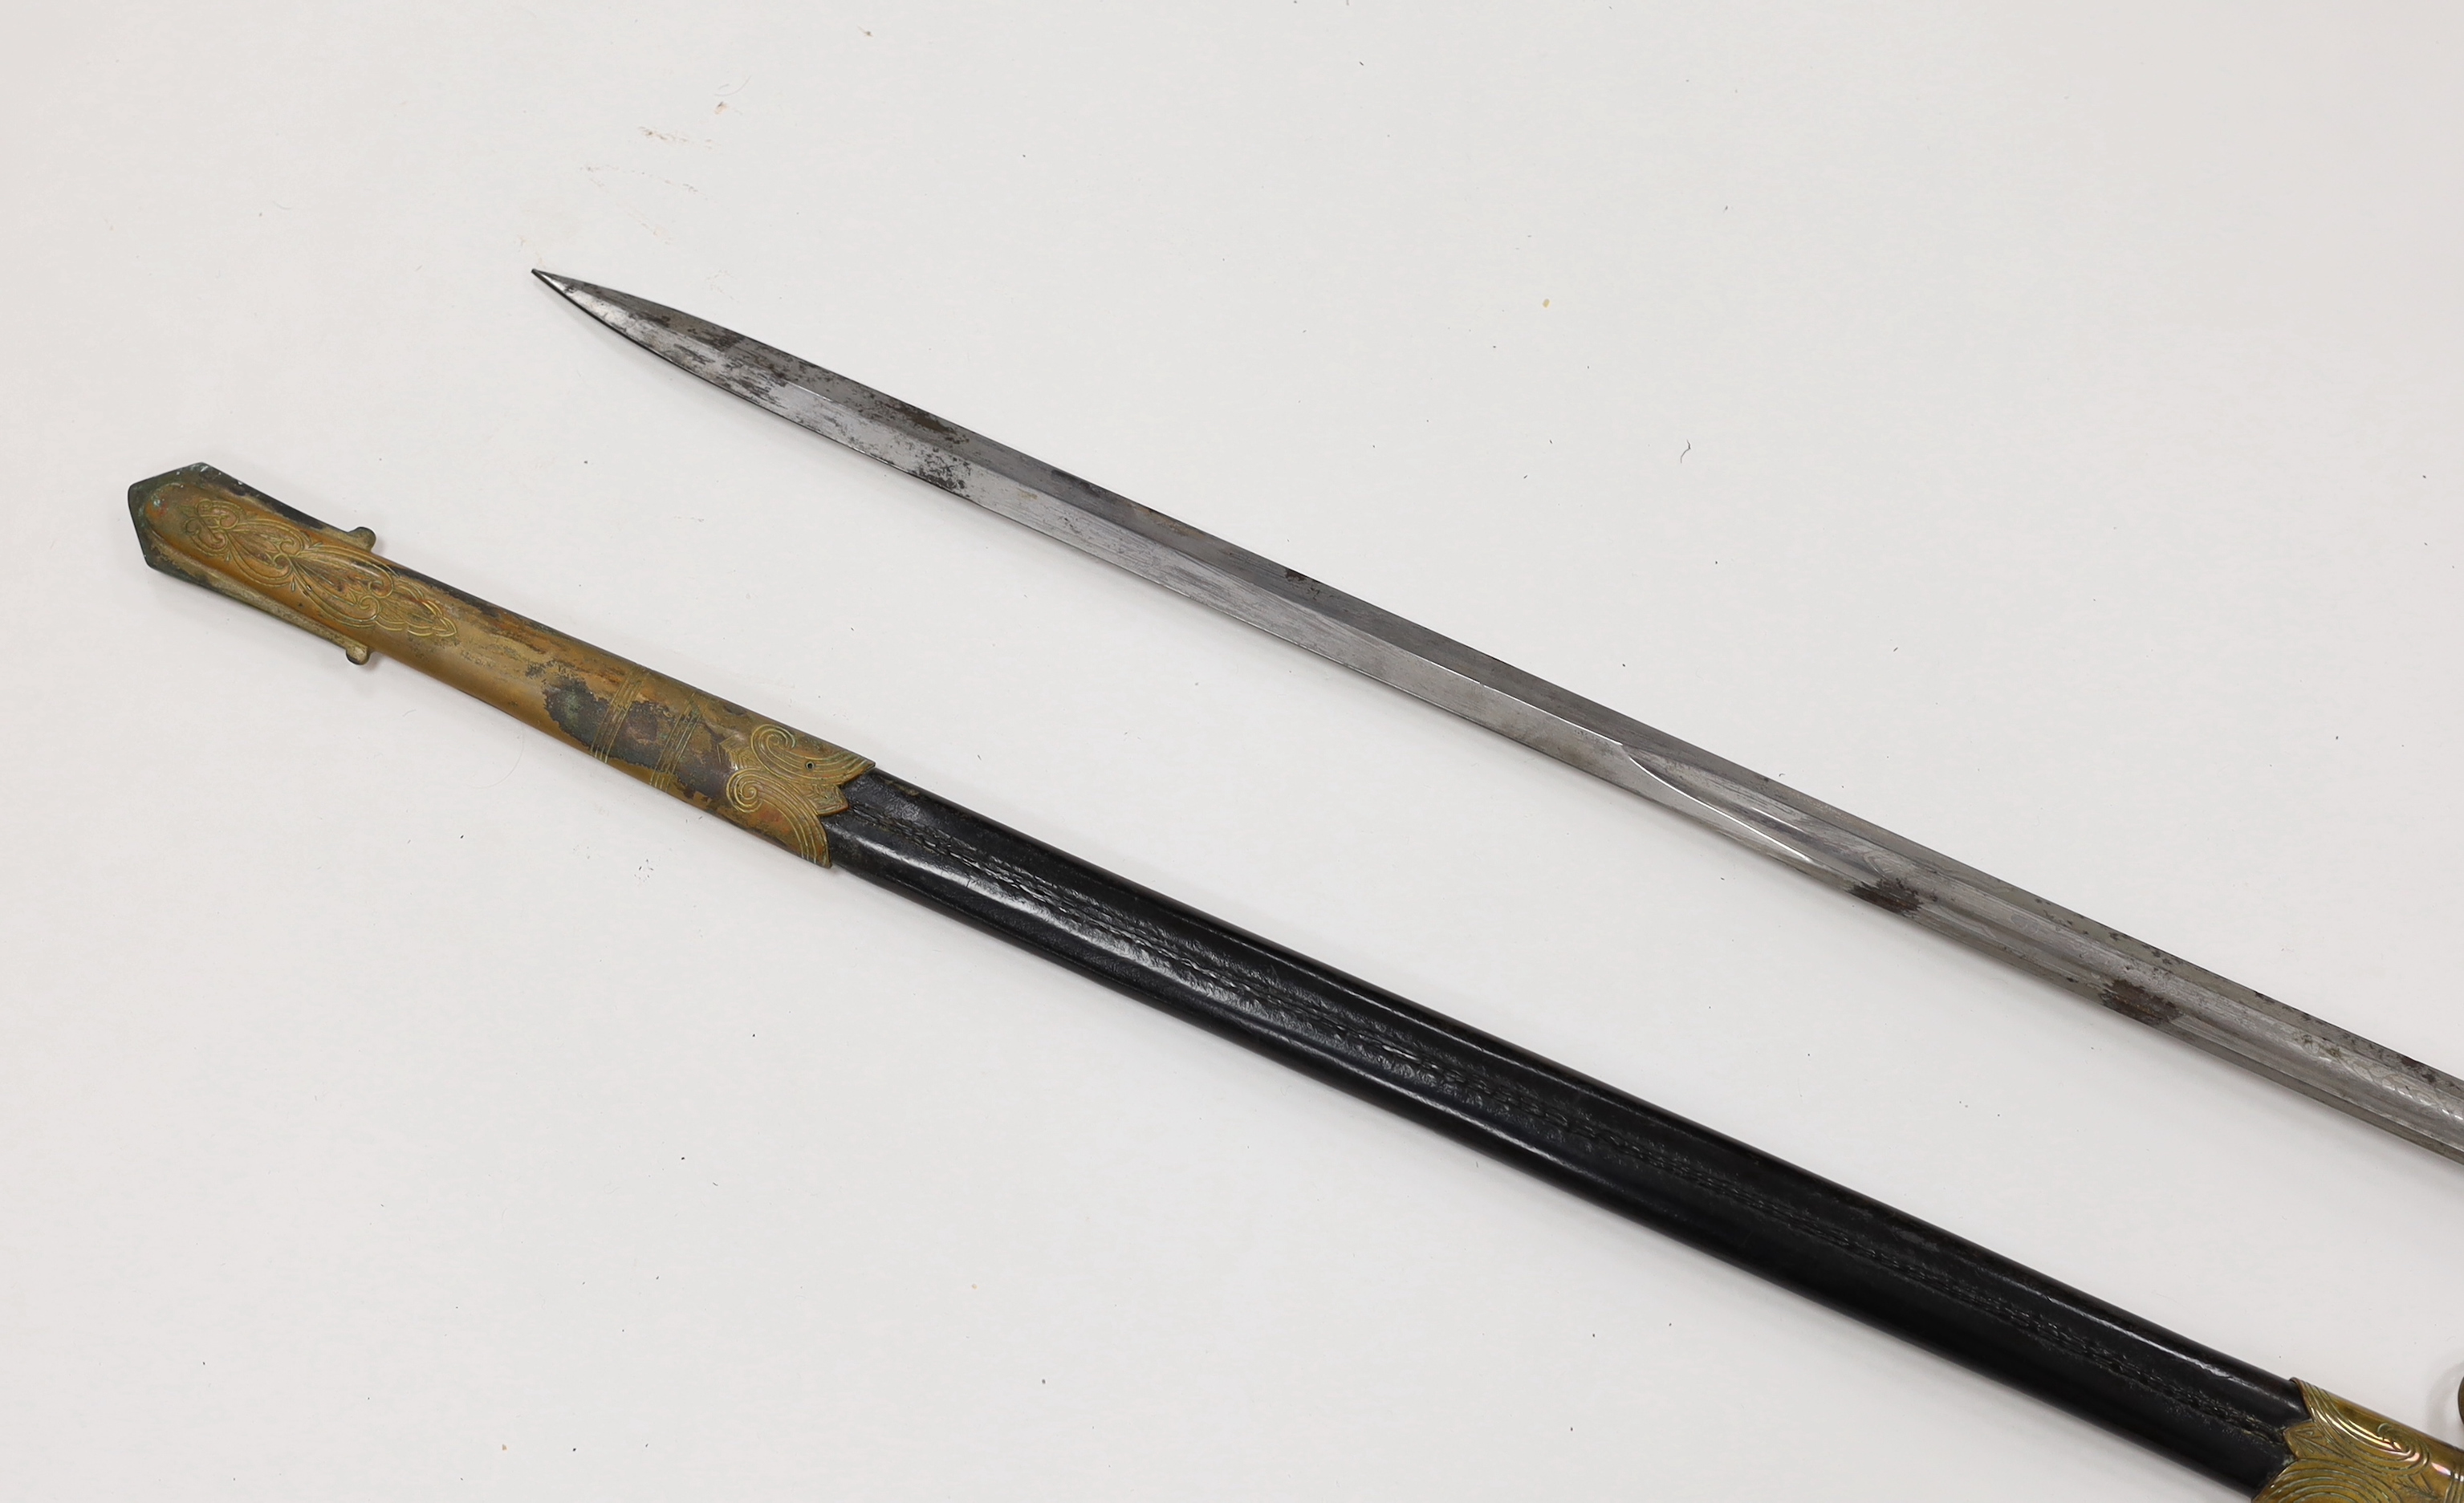 A George V naval officer’s sword, maker Grieves, in a leather scabbard, guard engraved G.P. Bewley, blade 79.5cm, together with outer leather cover